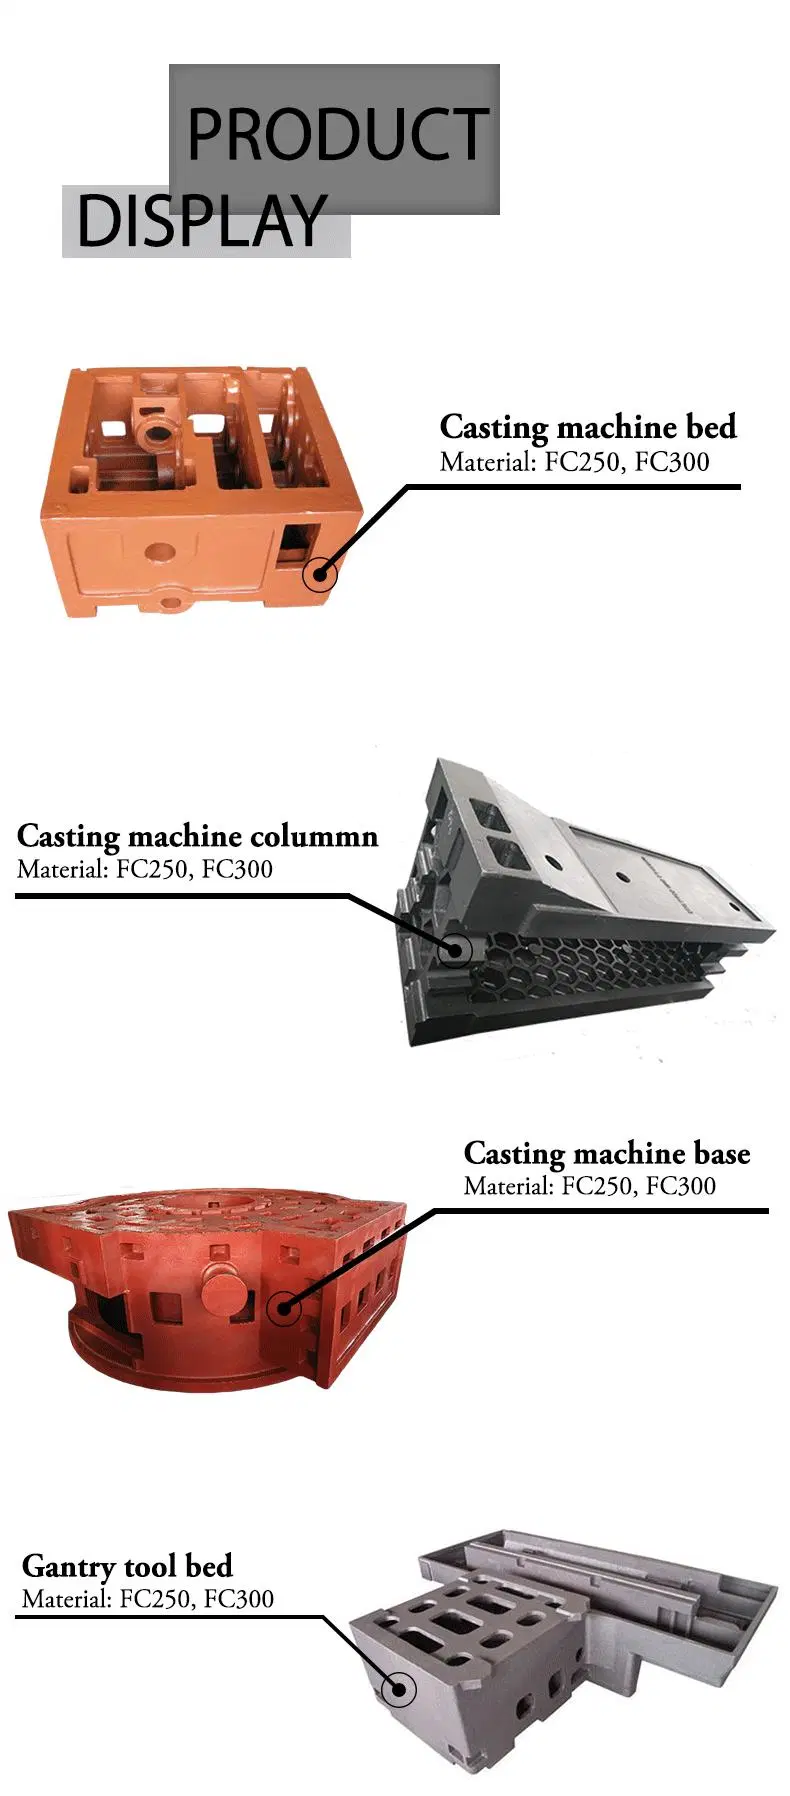 Casting Services for Custom Metal Parts in Copper, Brass, Stainless Steel, Heat Resistant Steel Casting